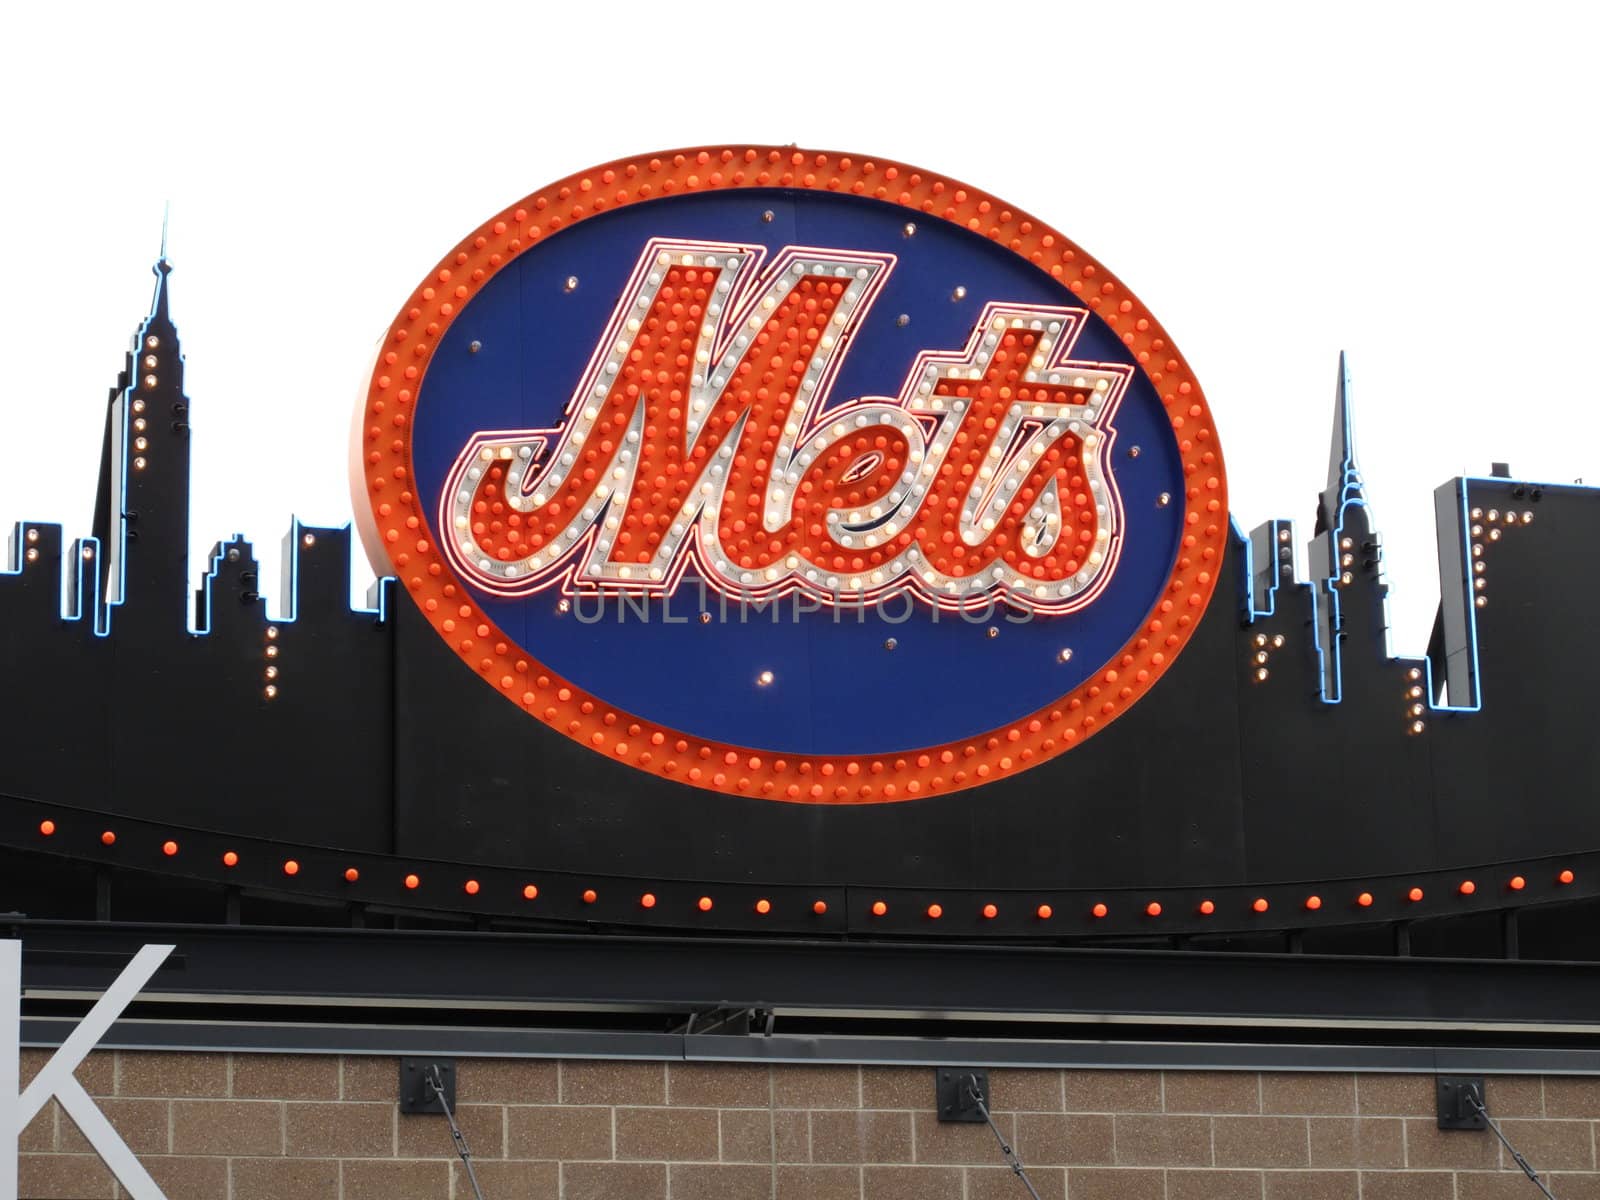 Classic New York Mets logo carried over to Citi Field from Shea Stadium